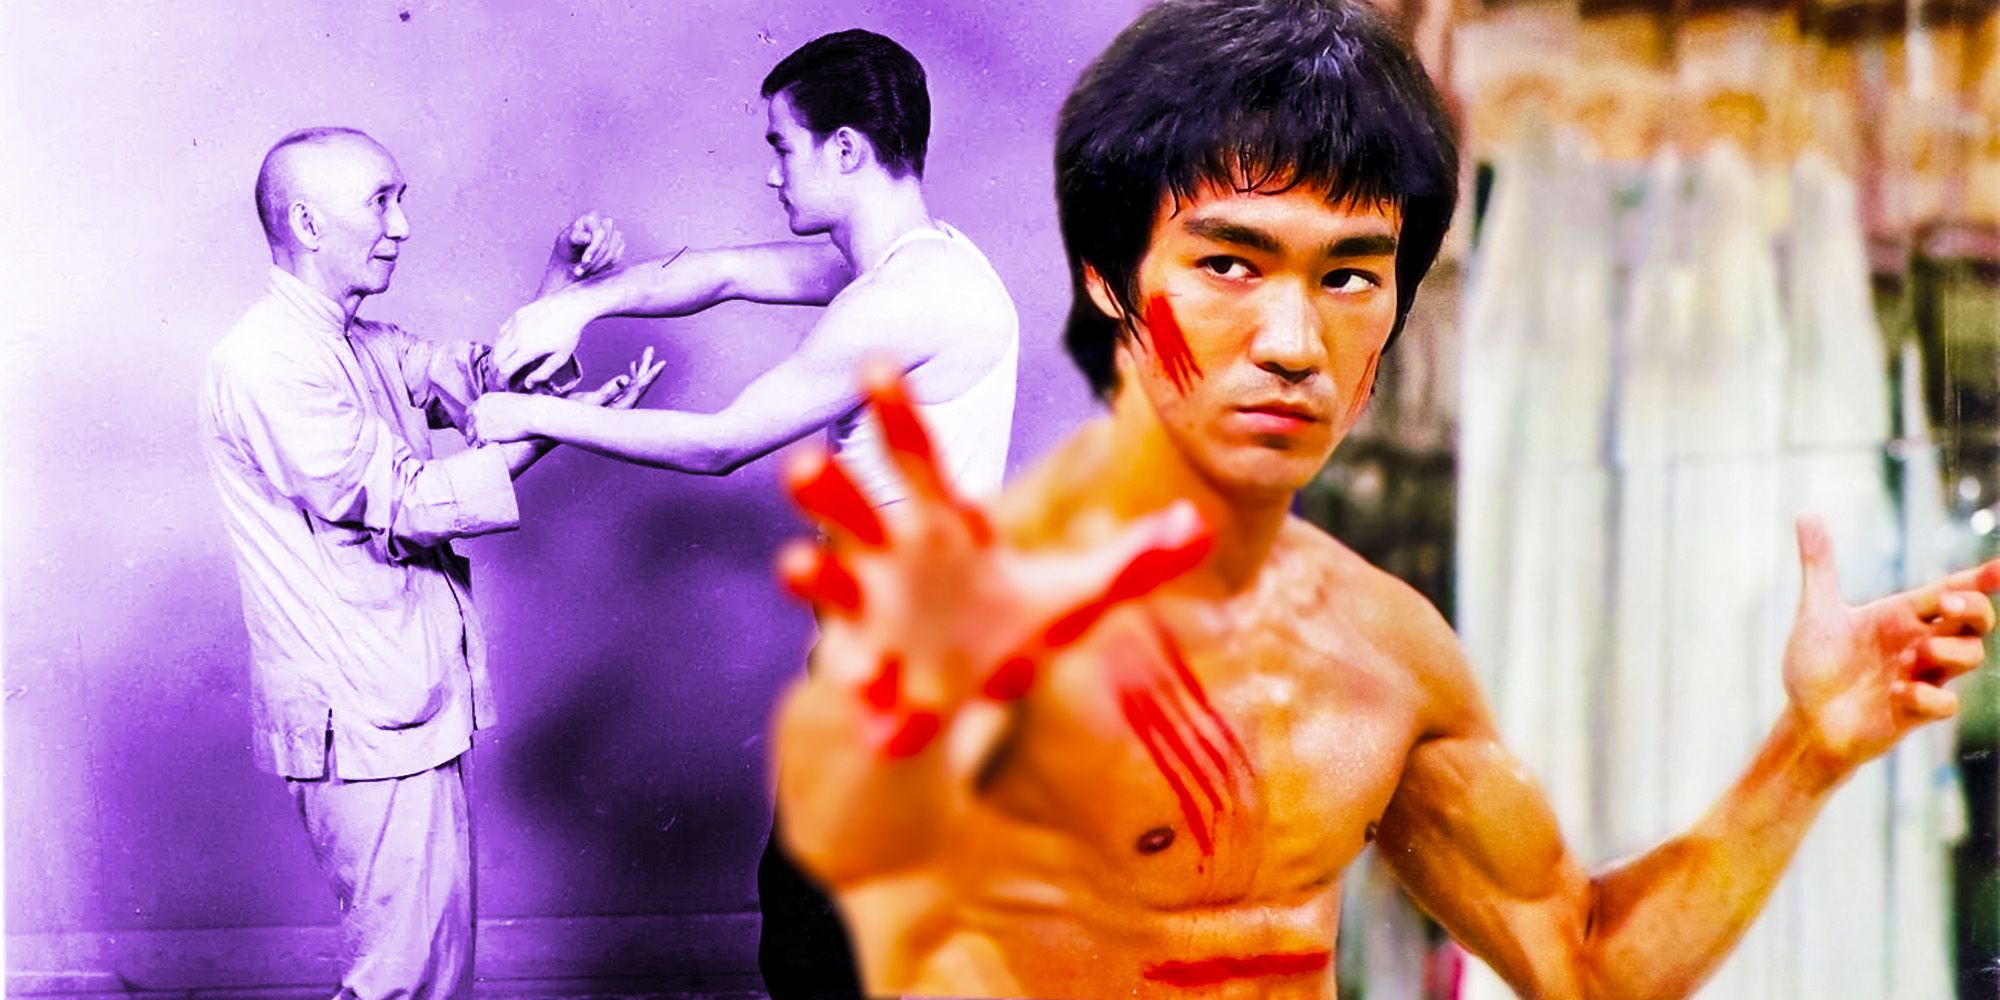 Bruce lee kicked out of Ip man kung fu school